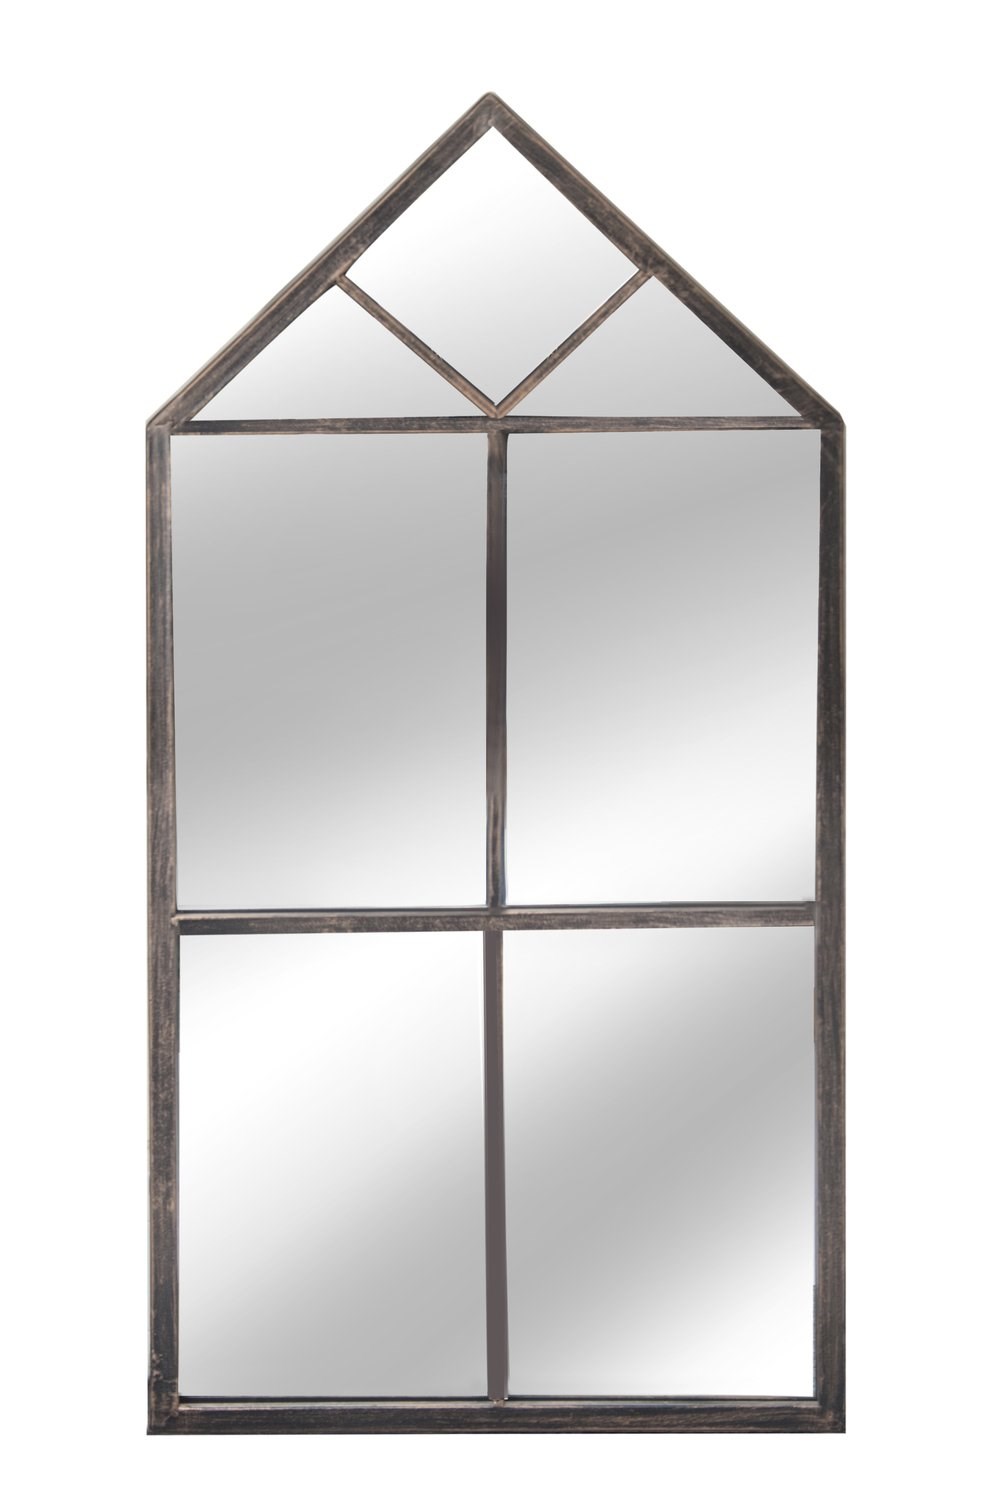 3ft 3in x 1ft 8in Metal Renaissance Peaked Glass Garden Mirror - by Reflect™